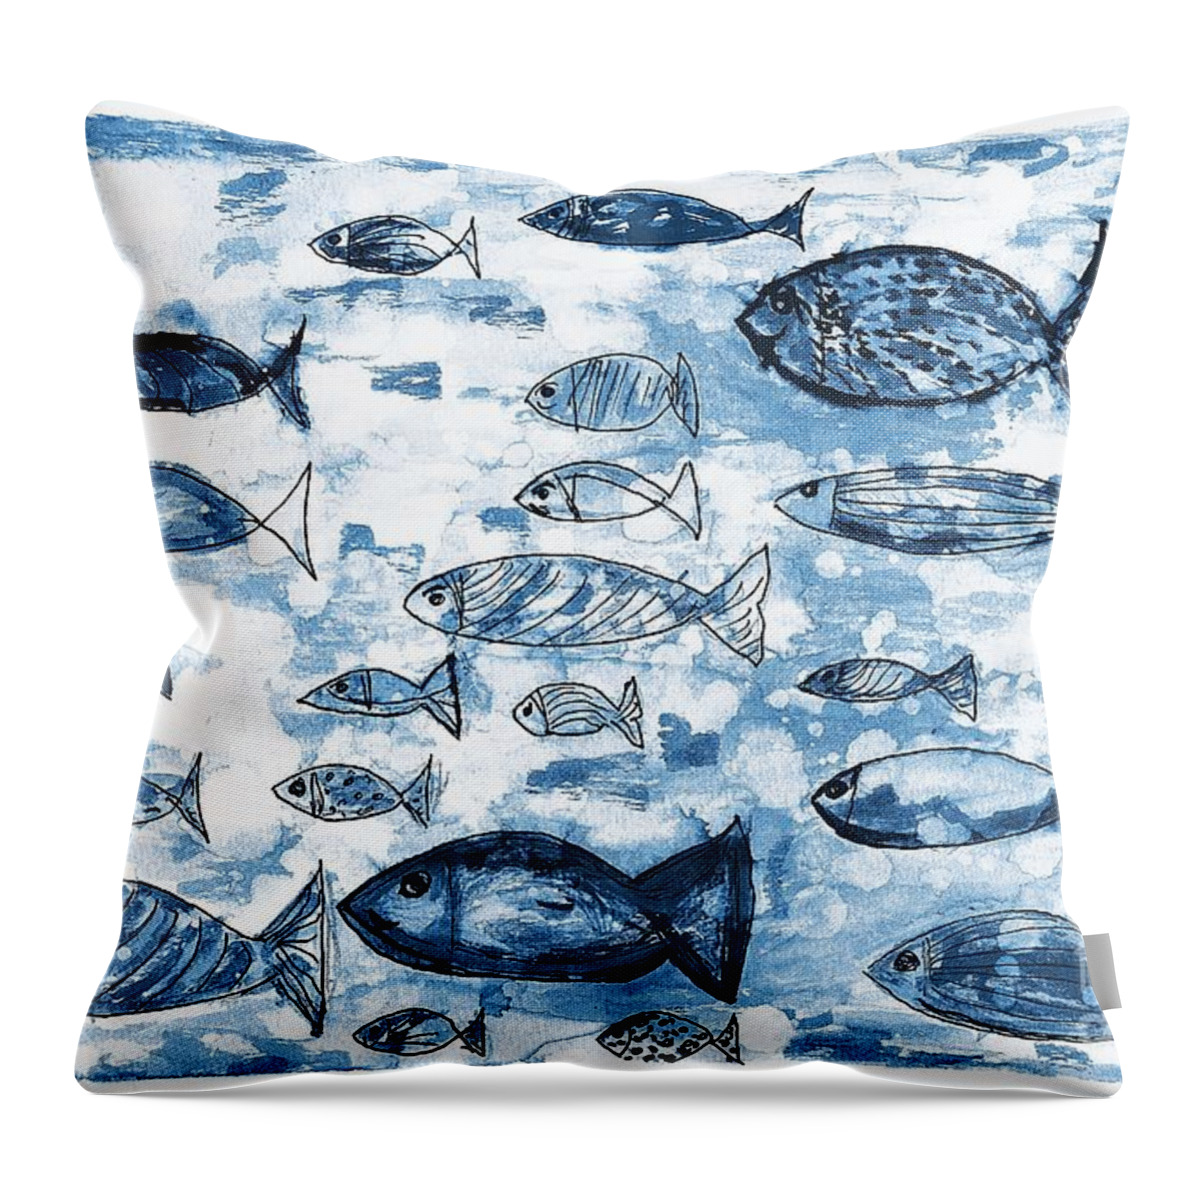 Fish Throw Pillow featuring the painting Blue Fish by Ramona Matei